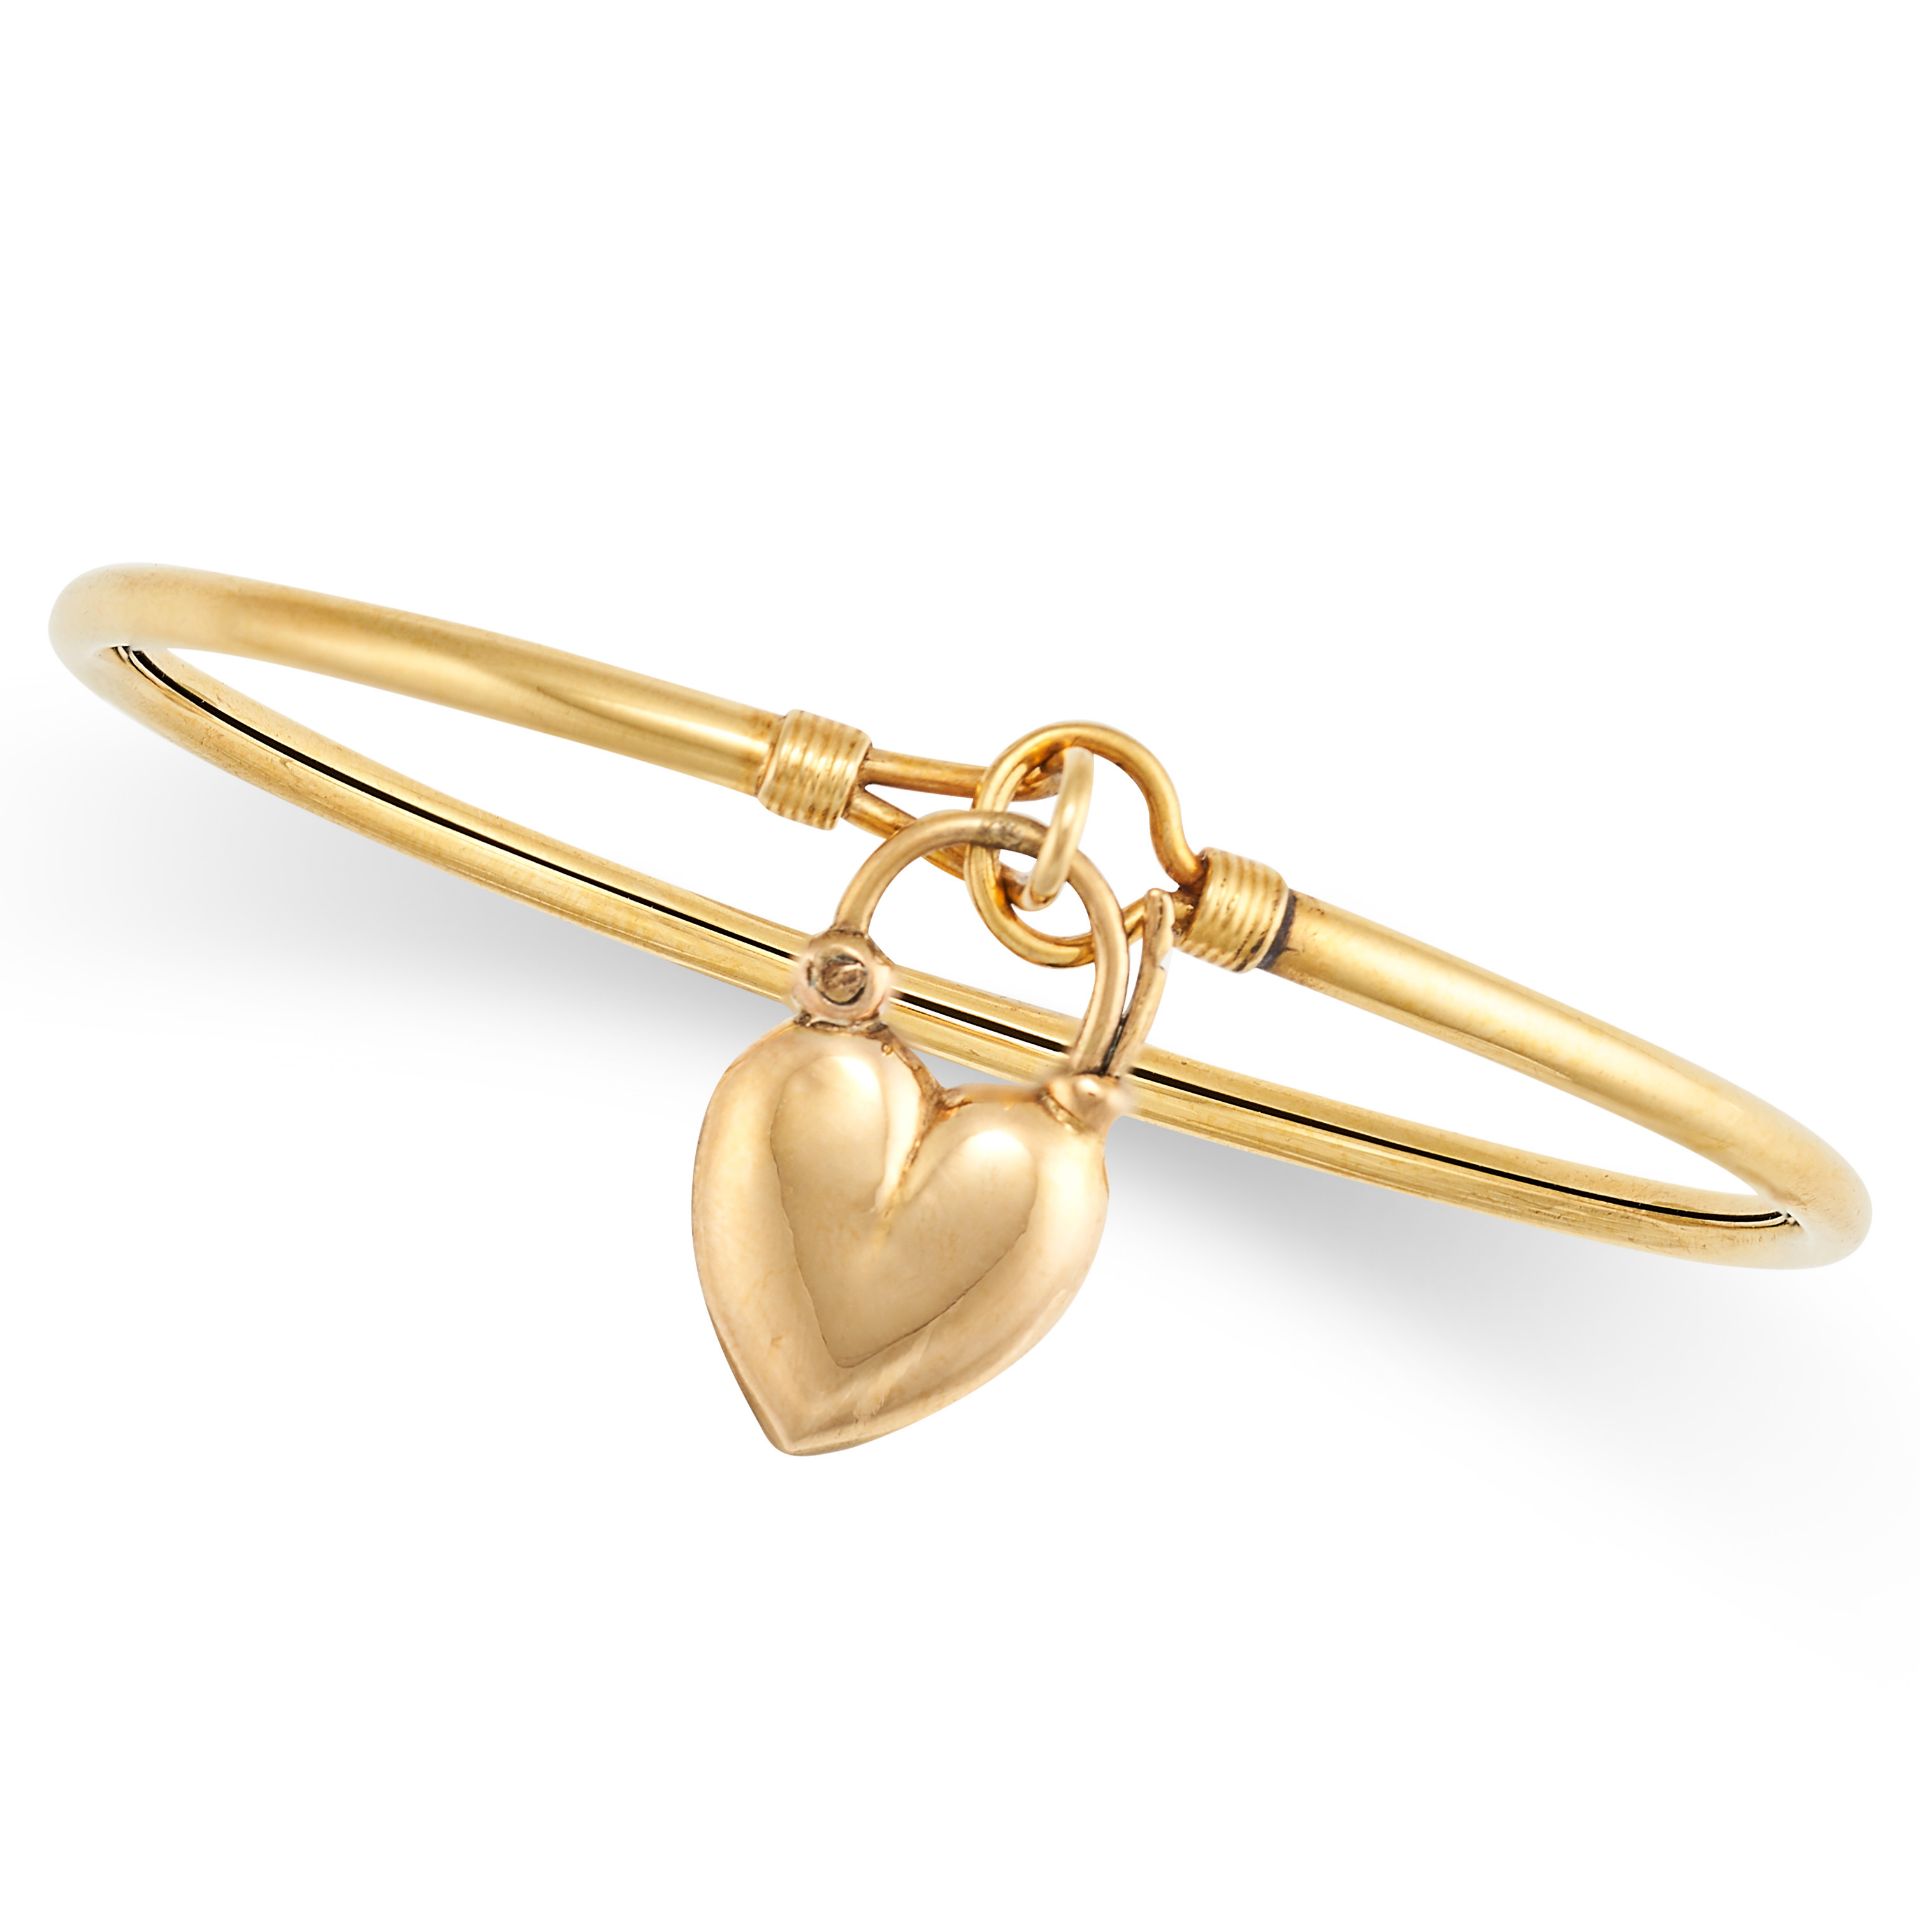 A GOLD BANGLE in yellow gold, suspending a heart shaped padlock charm pendant, no assay marks, in...